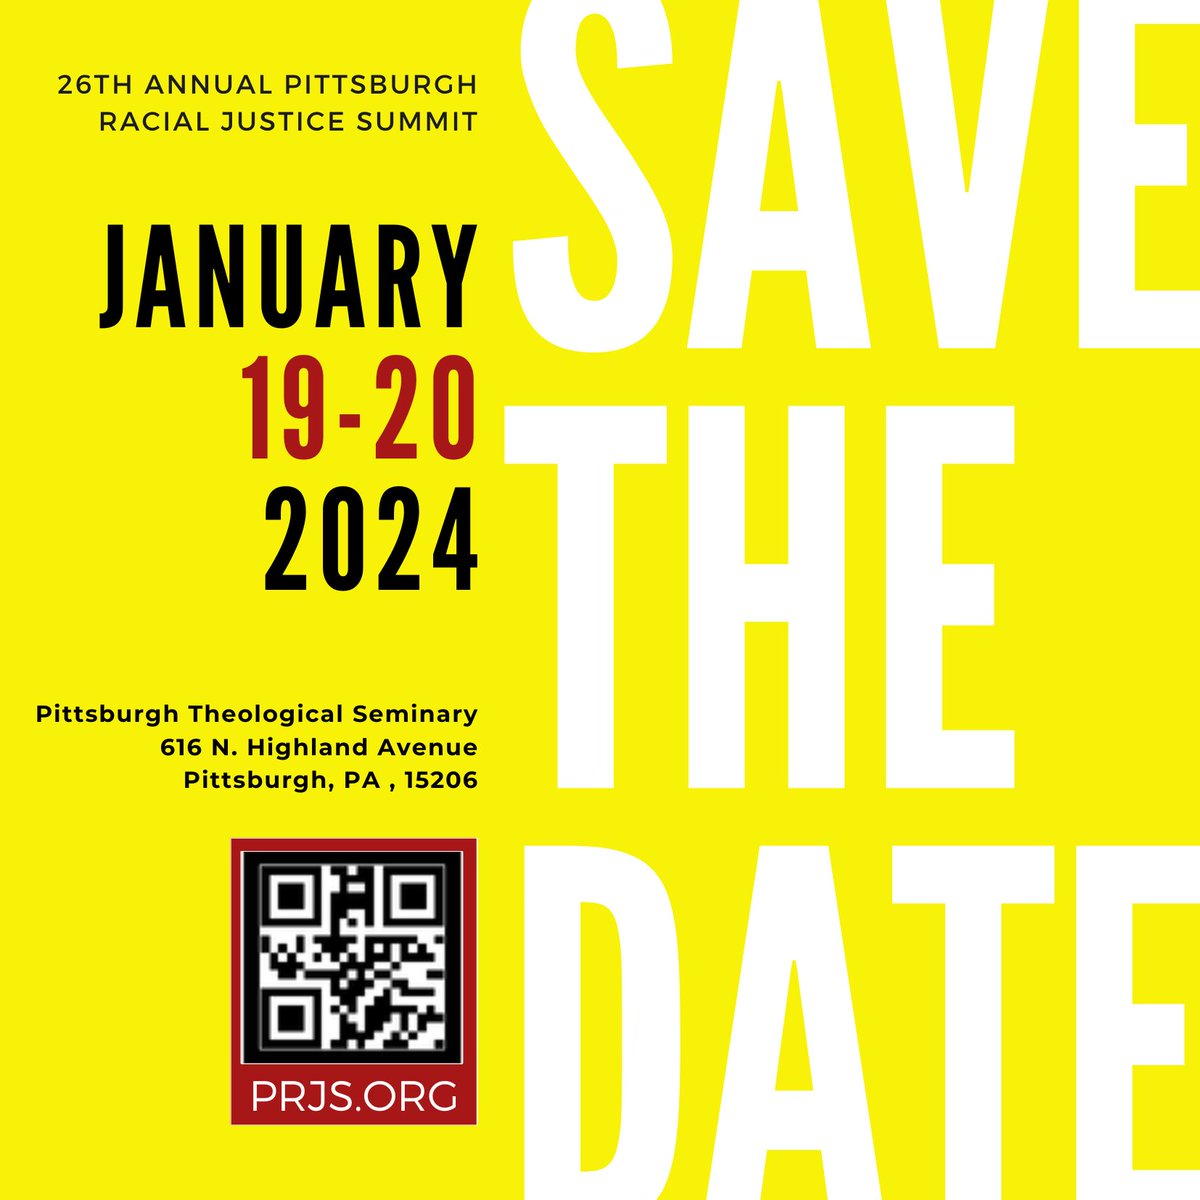 Mark your calendars! Join us for the 26th Annual Pittsburgh Racial Justice Summit on January 19-20, 2024. @ywcapgh is excited to partner with @justicepgh. Visit prjs.org for more info & to stay updated on this event.